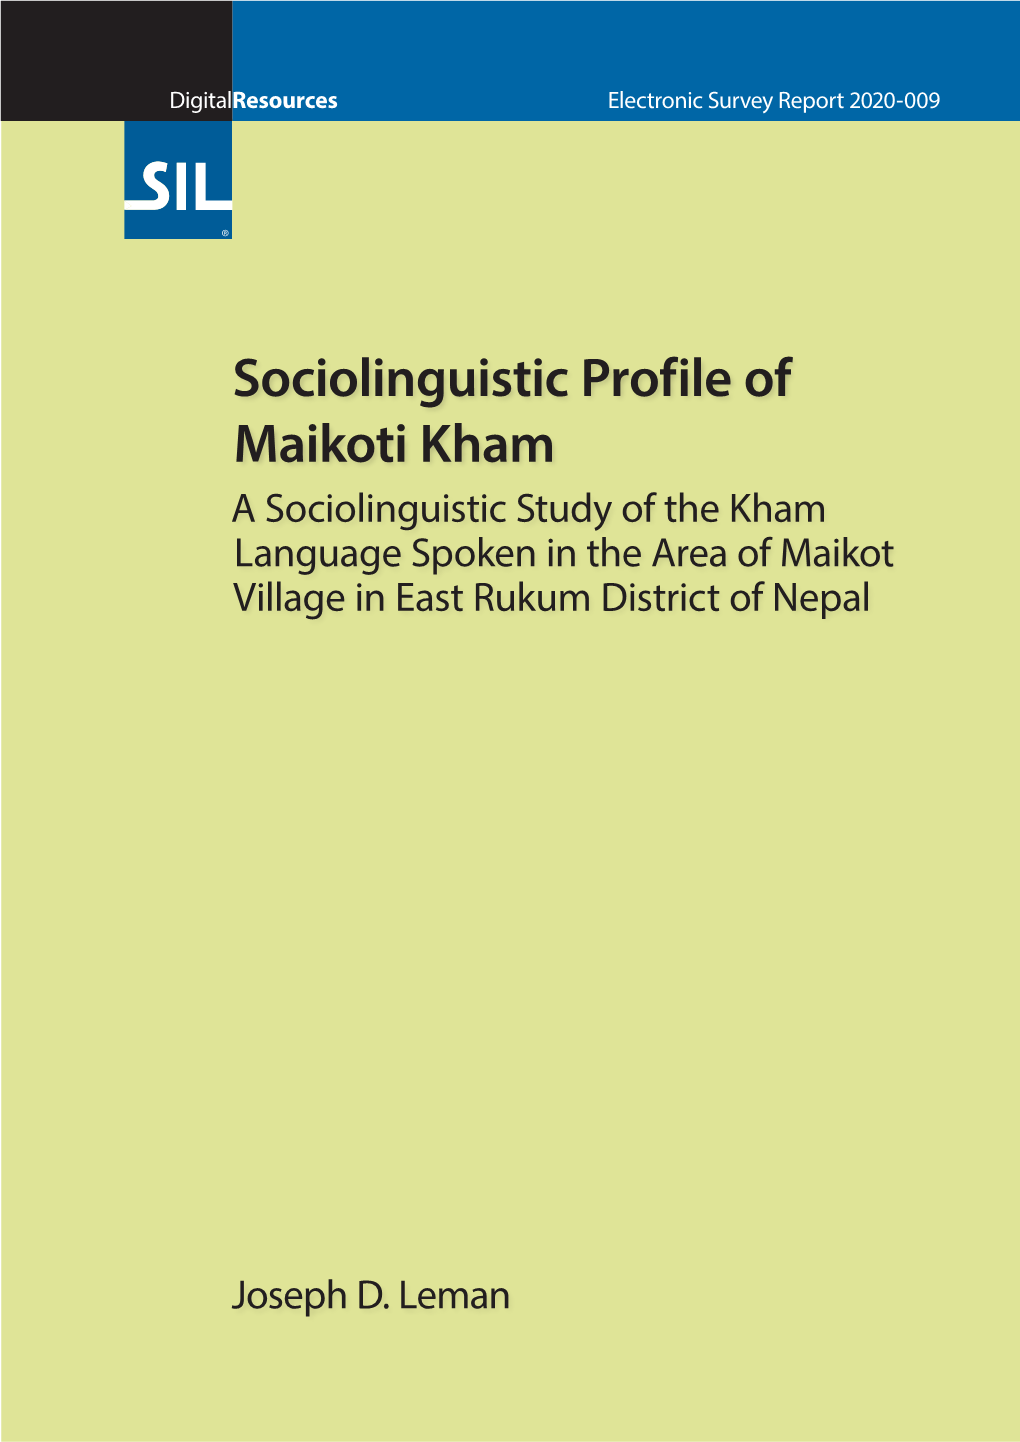 Sociolinguistic Profile of Maikoti Kham a Sociolinguistic Study of the Kham Language Spoken in the Area of Maikot Village in East Rukum District of Nepal